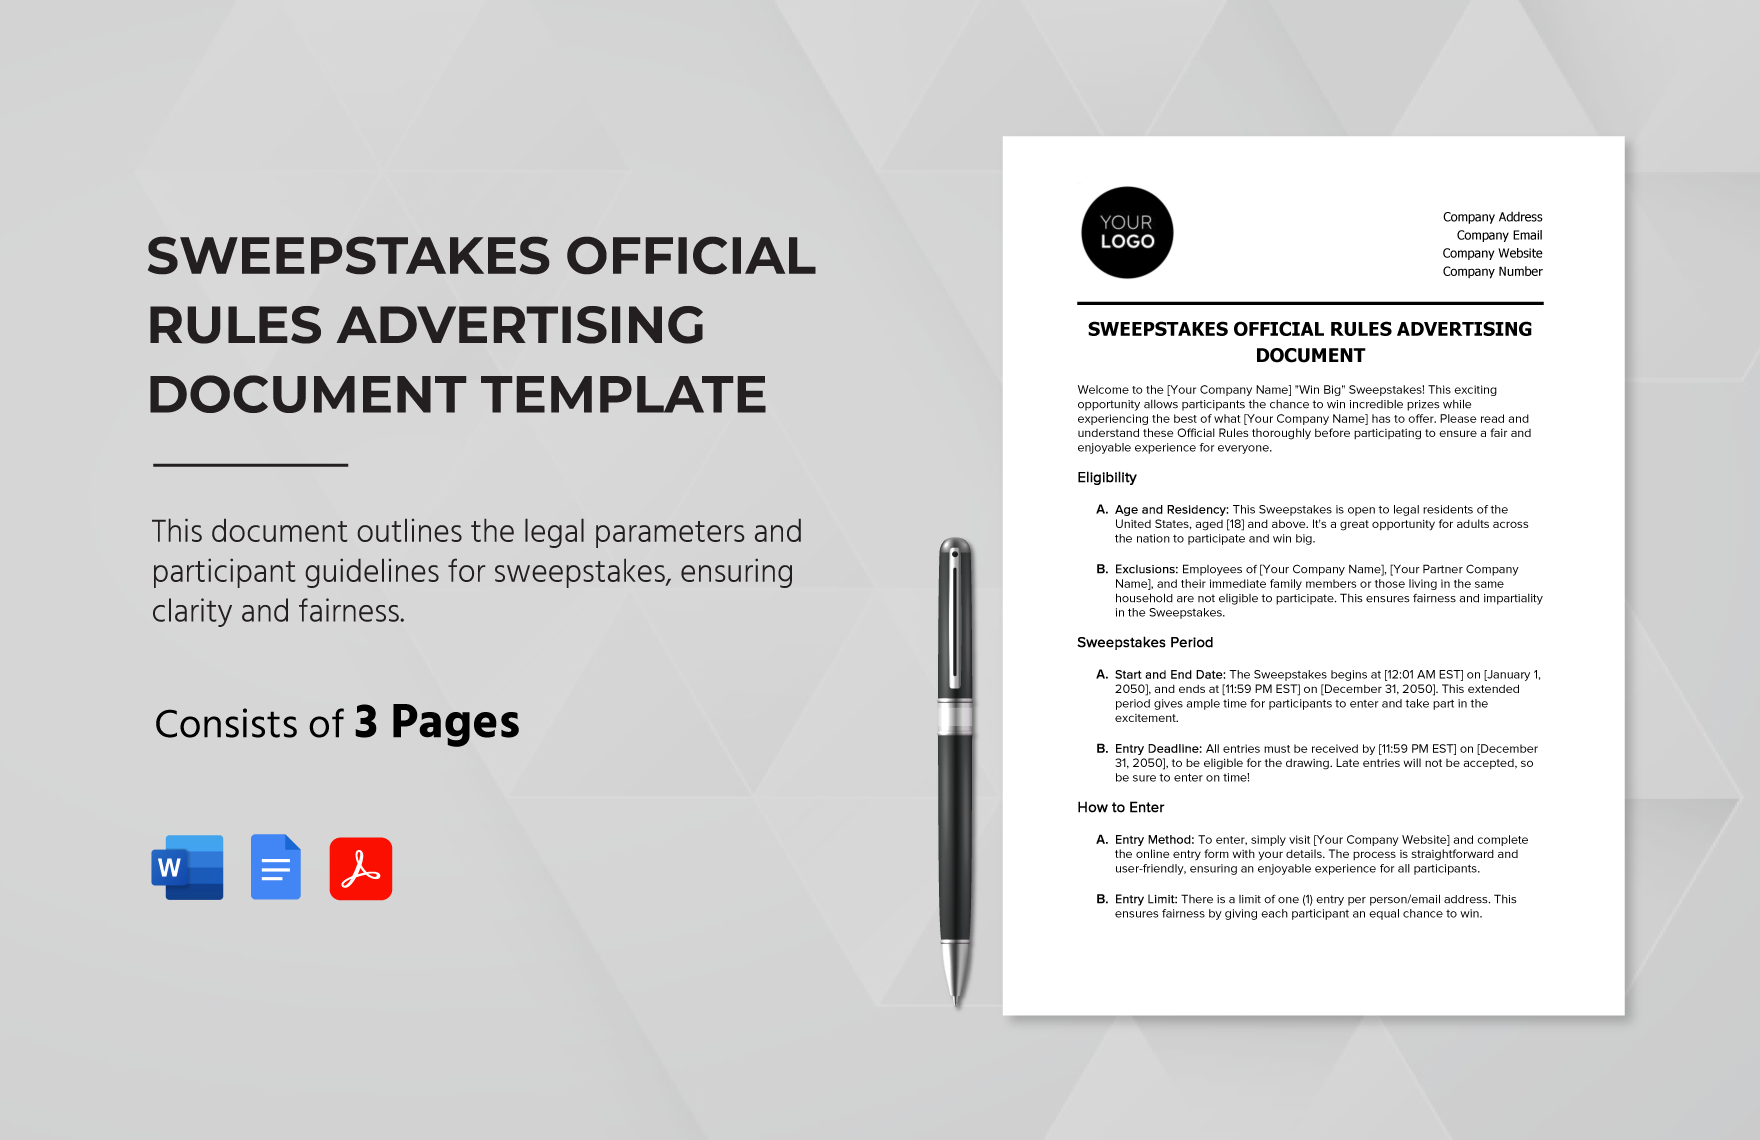 Sweepstakes Official Rules Advertising Document Template